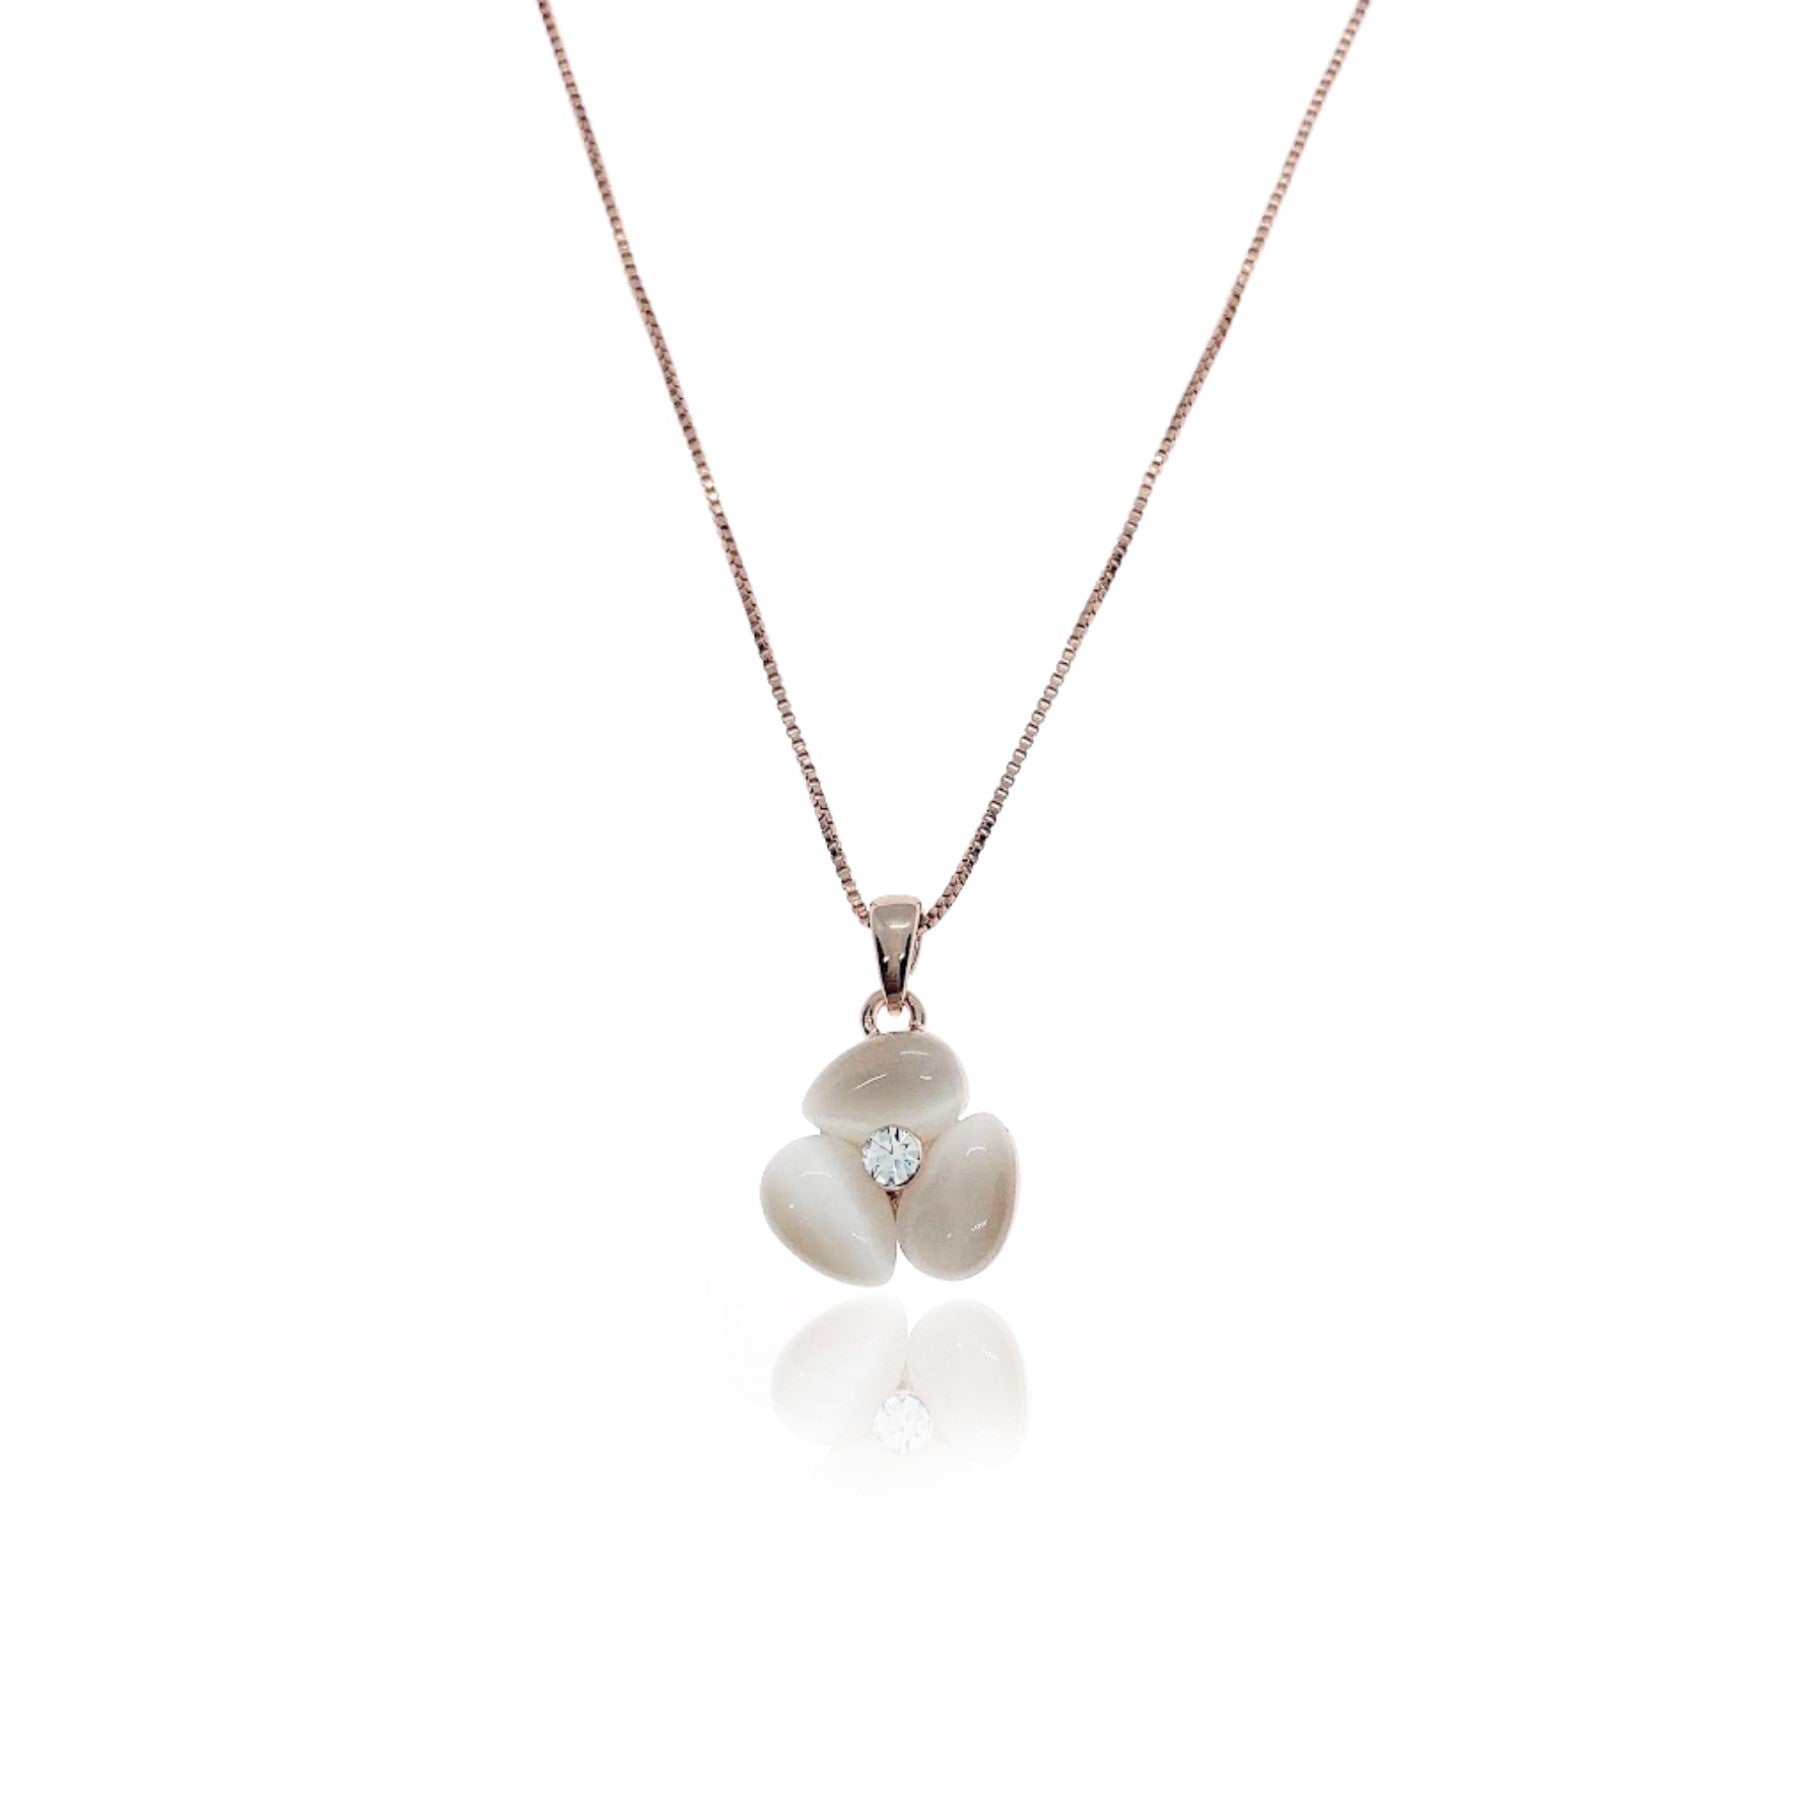 Flower Simulated Moonstone Necklace.